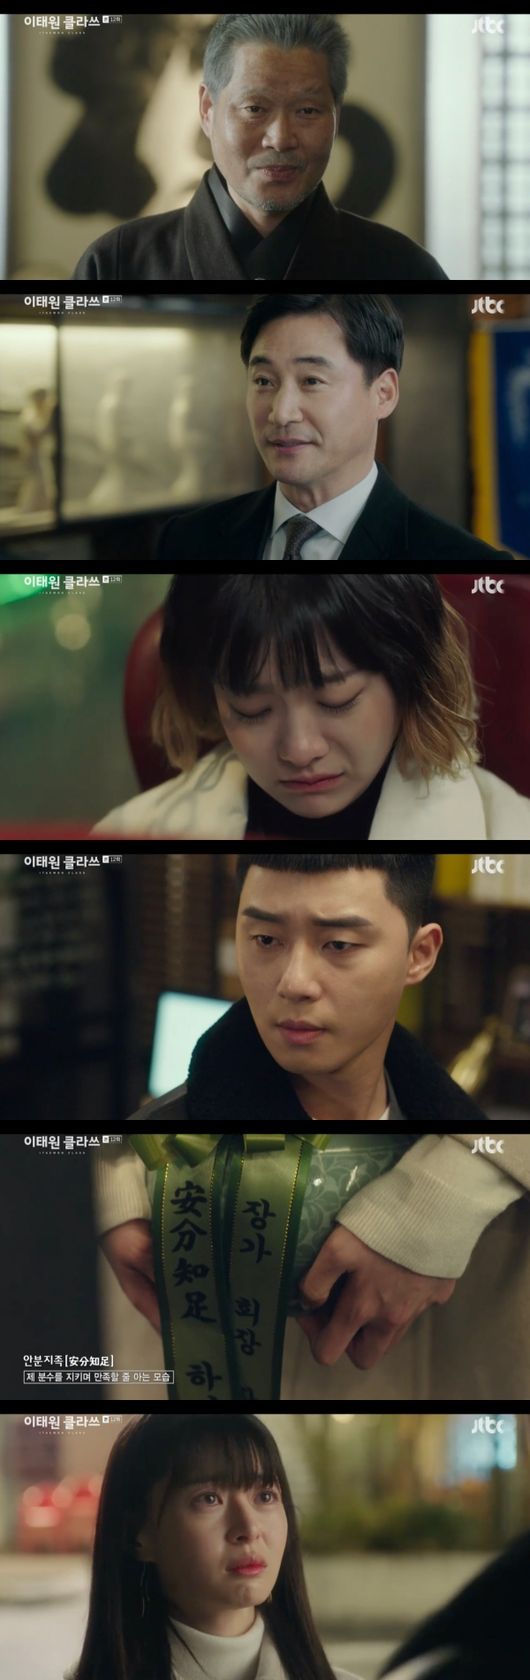 Itaewon Klath Park Seo-joon once again sharpened the blades of revenge in the scheme of the rich man.In the JTBC gilt drama Itaewon Klath (director Kim Sung-yoon, playwright Gwangjin) broadcast on the 7th, Park Seo-joon was drawn to Danger due to sudden withdrawal of investment.Jang Dae-hee (Yoo Jae-myung) joined hands with Chung Myung Holdings and drove the night into Danger. As Chung Myung Holdings, which invested 5 billion won, escaped, other investors broke out in line.In a moment, the night was hit hard. It was as planned by Jang Dae-hee.Joe-yool Lee (played by Kim Dae-mi), who was hurt by Parks rejection of Confessions, was on vacation.Joe-yool Lee, who was about to travel abroad, was soon shocked to find out he had brought Danger of the Month.Frustrated by the fact that investors had gone out in large numbers, franchise owners were raging at night: Dont if you want to, terminate your contract.The IC does not forsake trust with its owners, and does not forsake precious money. There is no change in our promised support and schedule. Oh Soo-ah (Kwon Na-ra), who visited the night with Jang Dae-hees errand, also saw the scene where Roy was suffering.The pots Oh Soo-ah brought with him had a ribbon with the message: Do the Anbangji ().Oh Soo-ah confessed his heart to Roy, hoping to stop revenge for Jangga, but Roy was determined.Park said on the phone of Joe-yool Lee, The real big thing is when my father was cut off from work for 20 years, when his father was hit and run and his death was covered up.It was over by then, he said.I was able to stand up because I promised revenge, and before that I could not have my happiness, I would break down the long house and I could not put it down or stop it before that.Oh Soo-ah, who was listening to the phone, sat down and poured tears.Roy and Joe-yool Lee soon found a way to break Danger.Kim Soon-rye (played by Chris Ryan), the grandmother of Tony (played by Chris Ryan), found out that she was an early investor and real estate mogul in the house.Roy, who had not broken his pride, changed his mind when he saw the employees desperately struggling to save the night.Park Roy was promised to attract investment to Kim Soon-rye on condition of winning MinorceFoa.However, on the day of the final MinorceFoa, Danbam was once again hit by a hurdle.It has been reported that Ma Hyun-yi (Lee Joo-young) was a transgender by Jang Geun-soo (Kim Dong-hee)s scheme. Ma Hyun-yi wandered the broadcasting station without enduring the harsh gaze of people.You can run away, no, you have done nothing wrong, you dont have to convince anyone else that you are, Park said to Mah Hyun, who tries to pretend to be okay.However, Park Roy thought that a thousand dollars are boiling in the inside and burned his will to revenge.Ma calmed down with the comfort of Roy and the encouragement of Joe-yool Lee. And then he entered the recording studio.And I will win today. Baek Roy recovered his smile when he saw such a mahyeon.Itaewon Klath captures broadcast screen